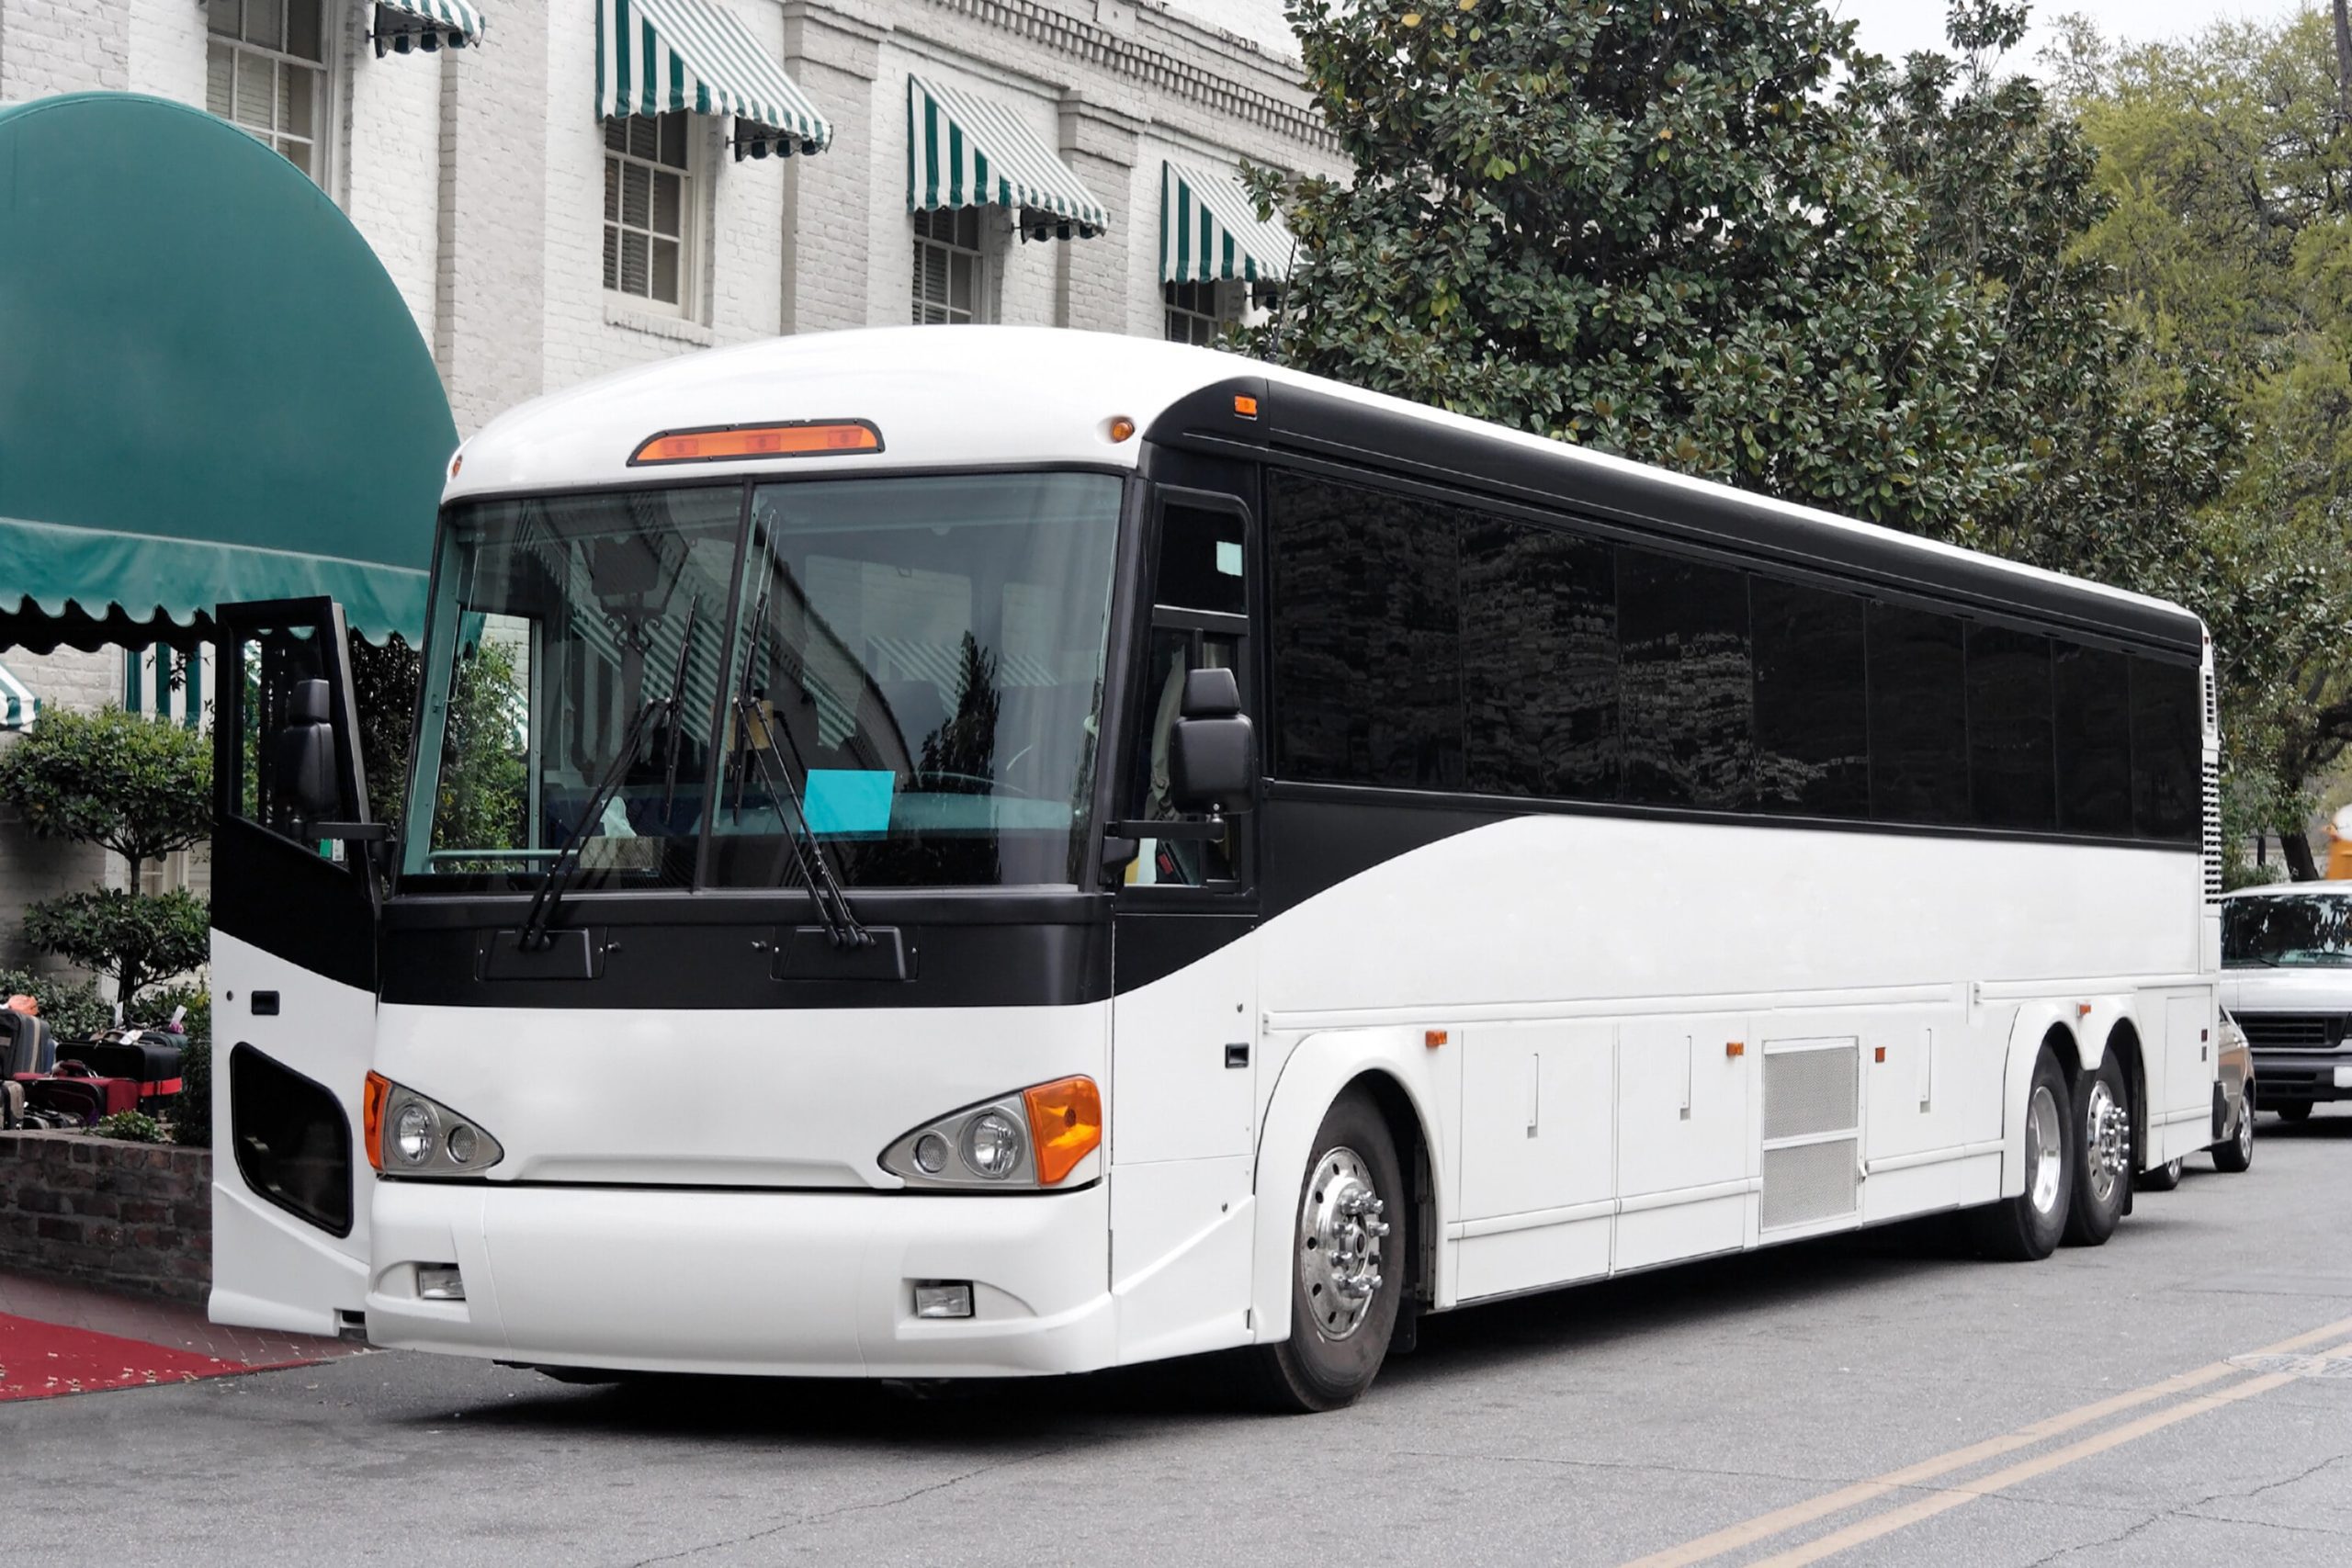 A white charter bus parked outside of a hotel that has a green awning.